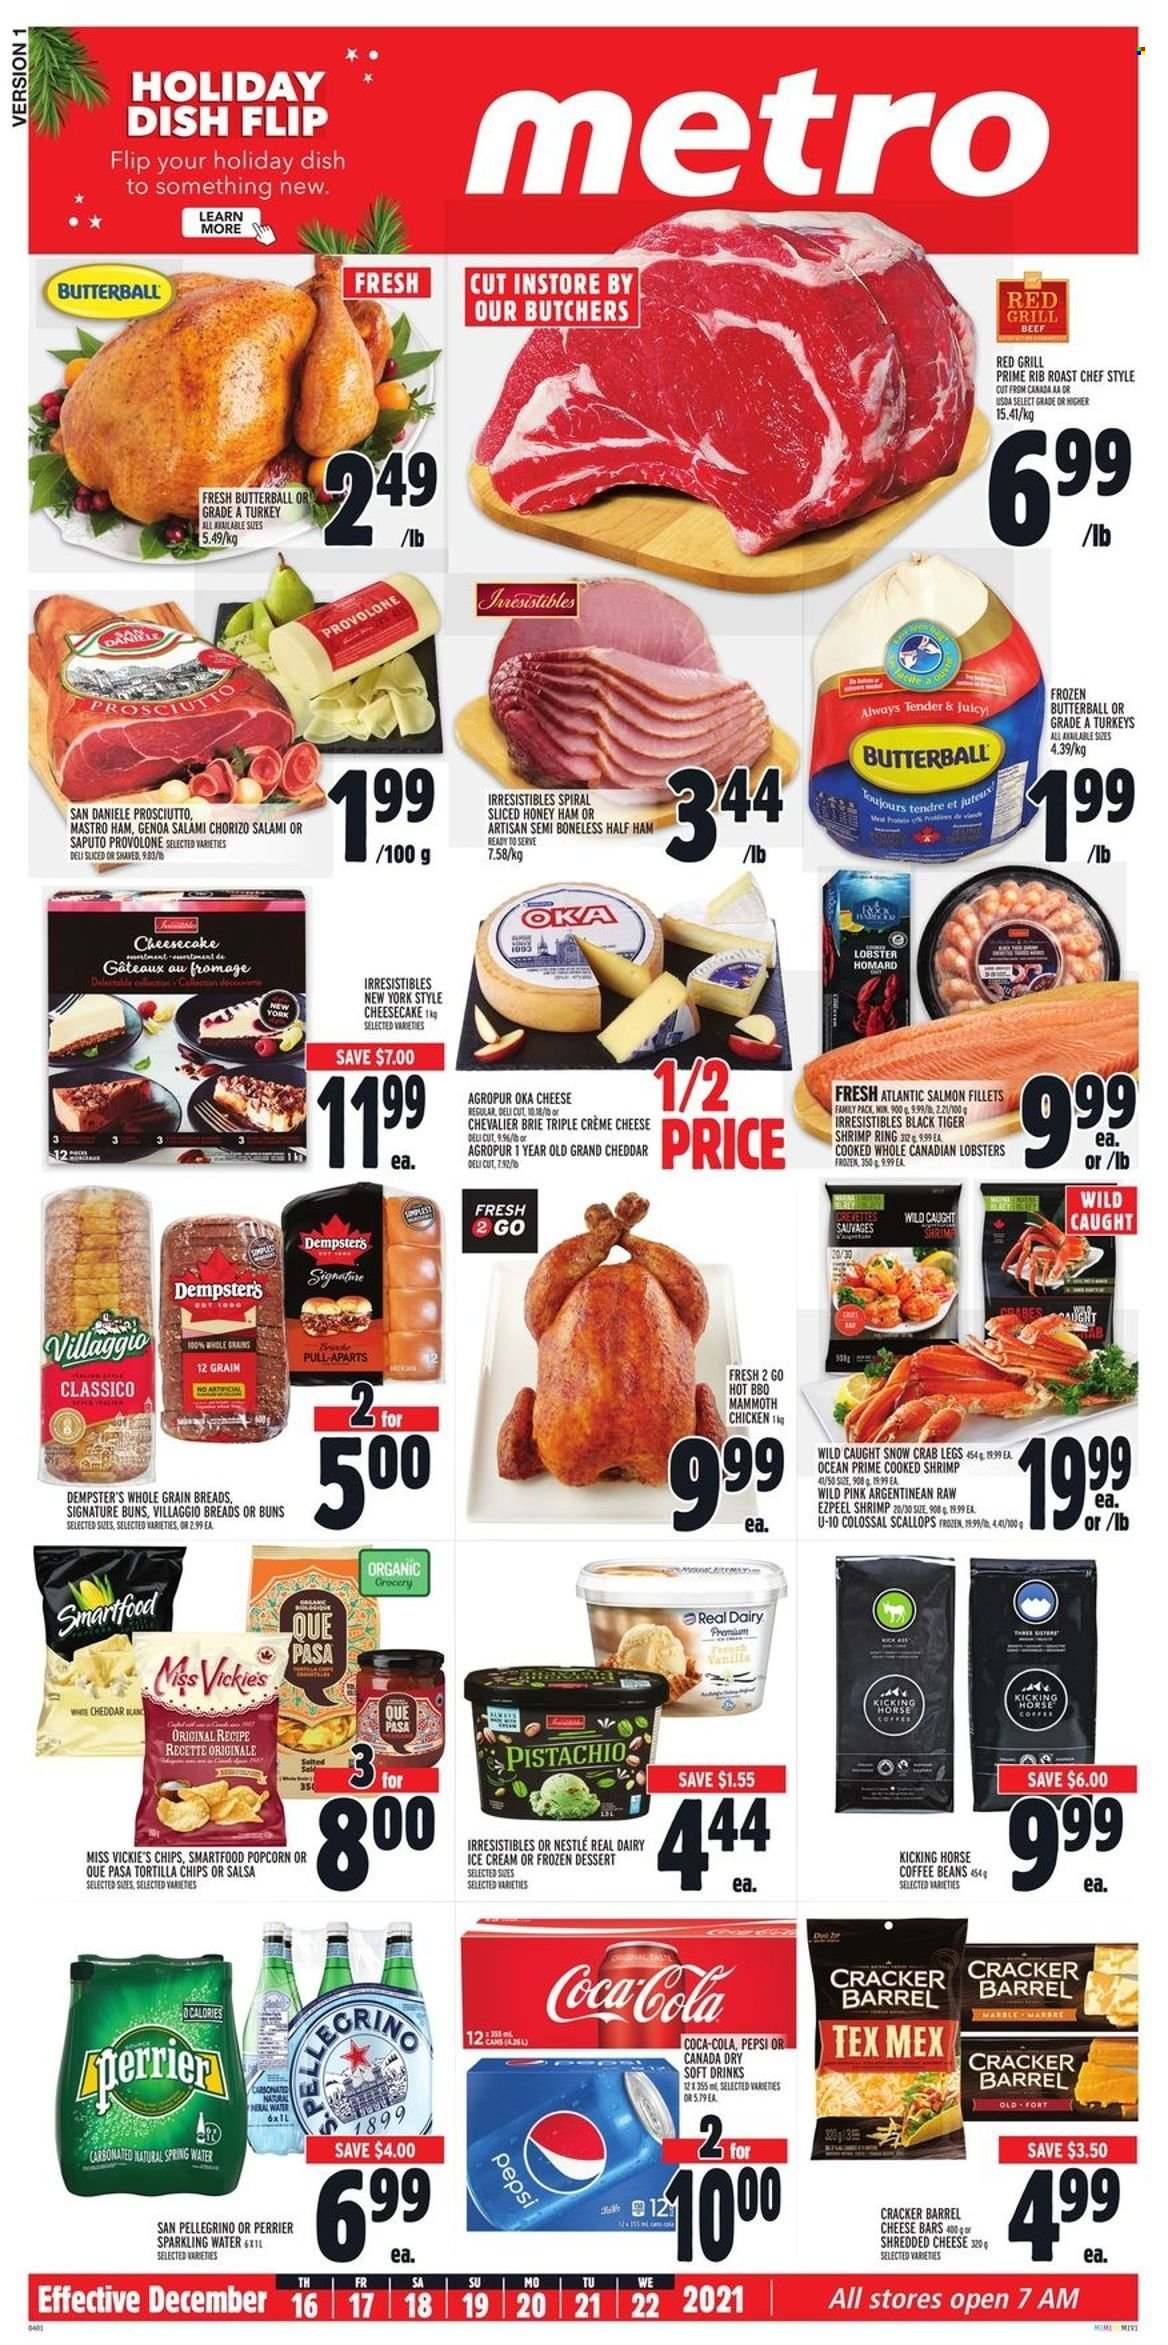 thumbnail - Metro Flyer - December 16, 2021 - December 22, 2021 - Sales products - buns, lobster, salmon, salmon fillet, crab legs, crab, shrimps, Butterball, salami, half ham, ham, prosciutto, shredded cheese, brie, Provolone, ice cream, crackers, tortilla chips, Smartfood, popcorn, salsa, Classico, Canada Dry, Coca-Cola, Pepsi, soft drink, Perrier, spring water, sparkling water, San Pellegrino, coffee beans, turkey, Nestlé, chorizo. Page 1.